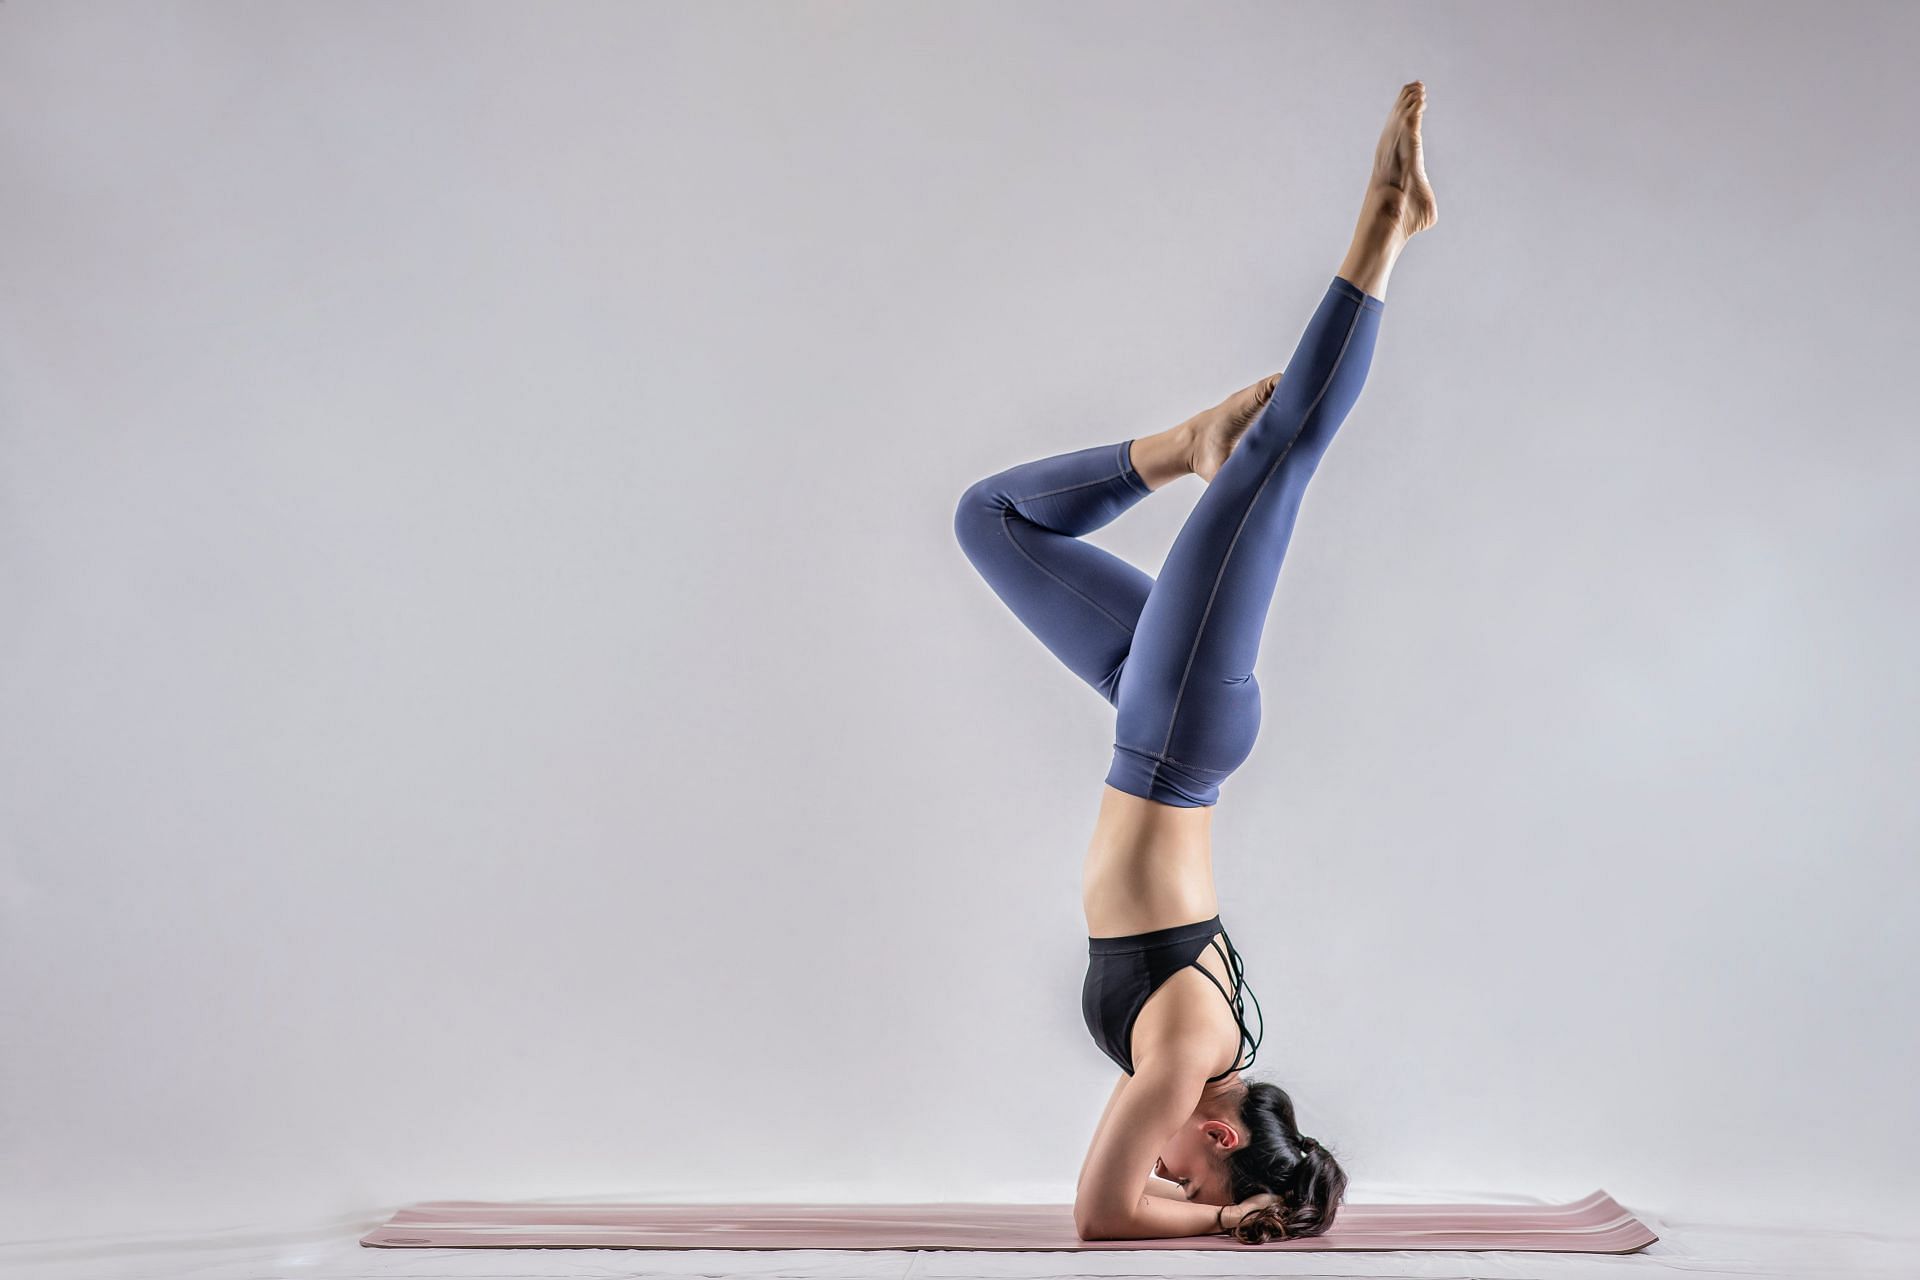 Supported headstands can be challenging, but the best method for safety is to develop the pose from the ground up. (Image via Unsplash/ Ara Cho)